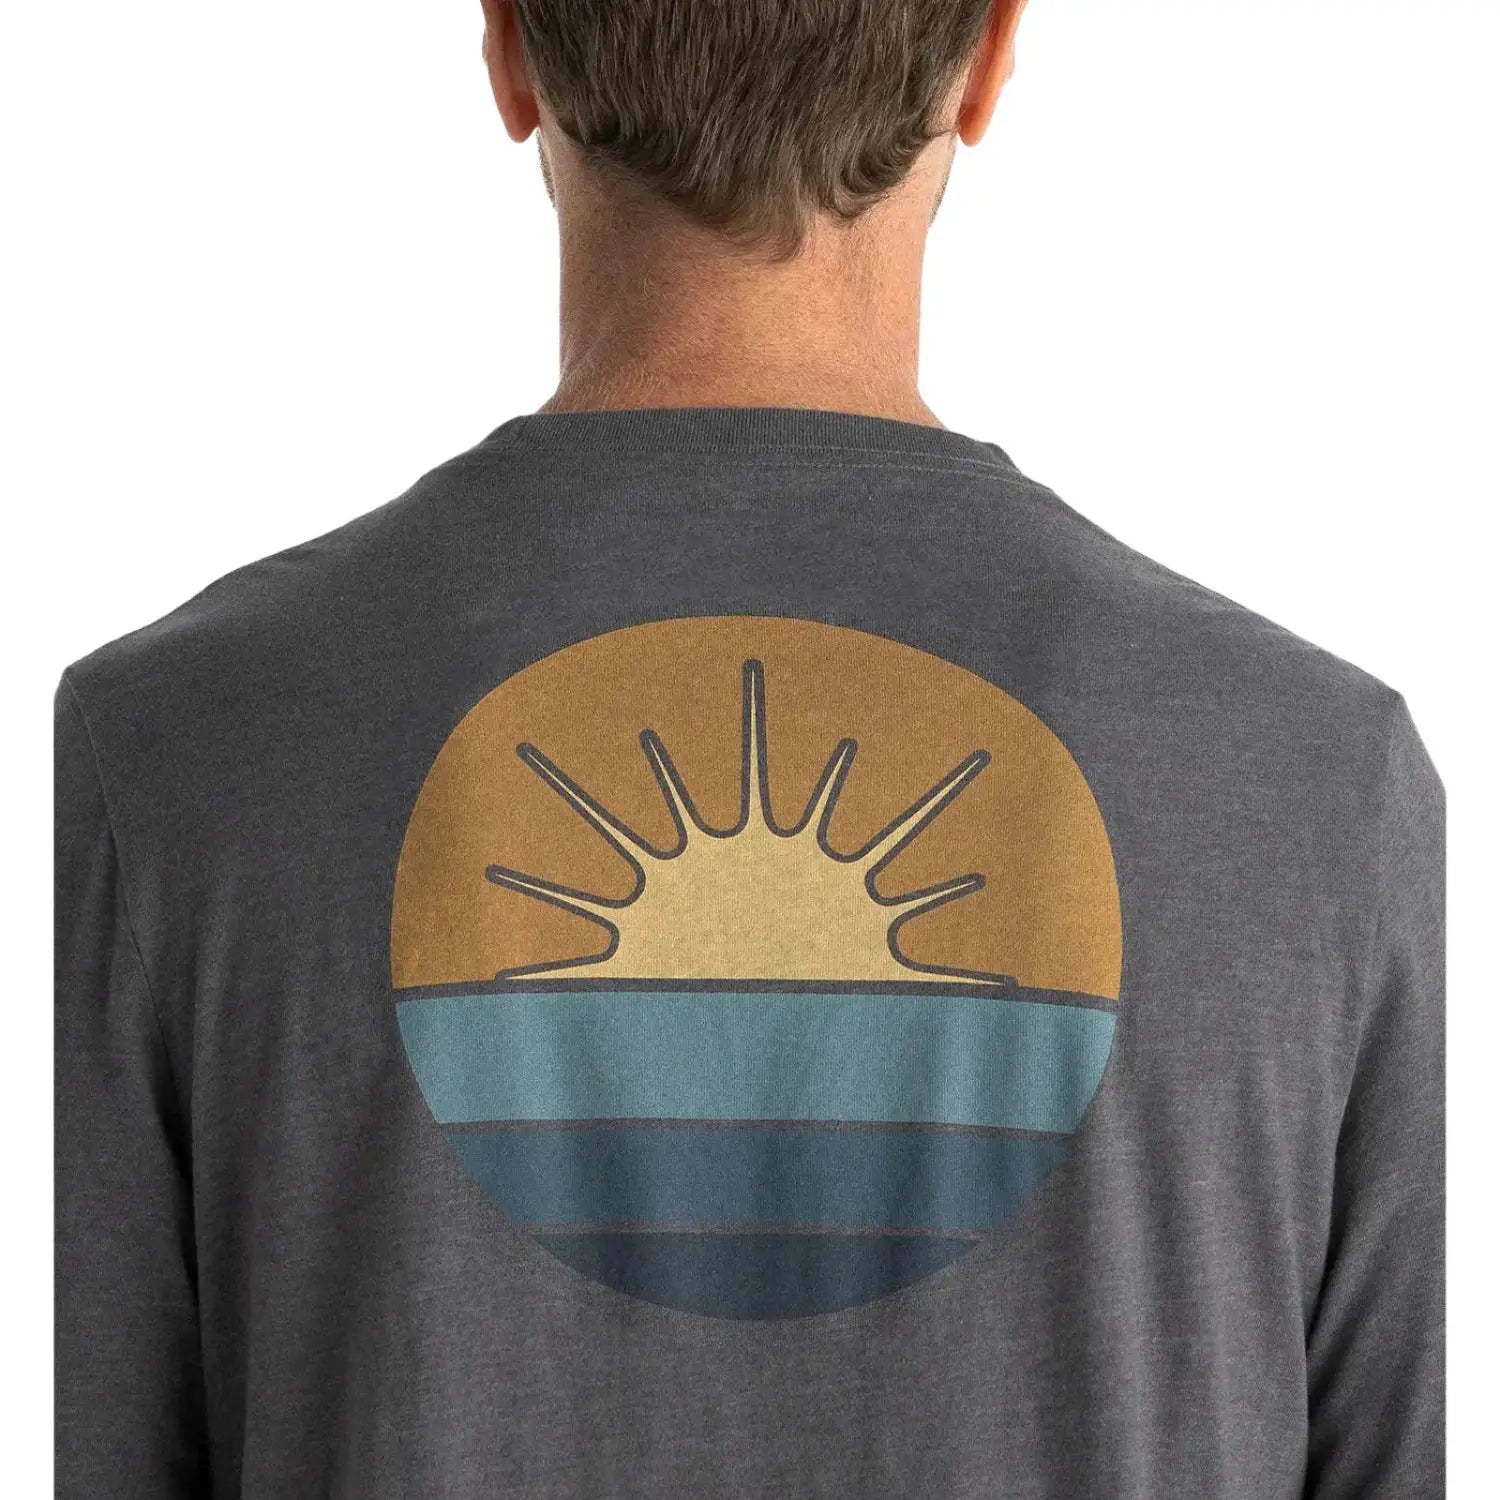 Free Fly M's Low Light Long Sleeve, Heather Black Sand, view of graphic on back of model